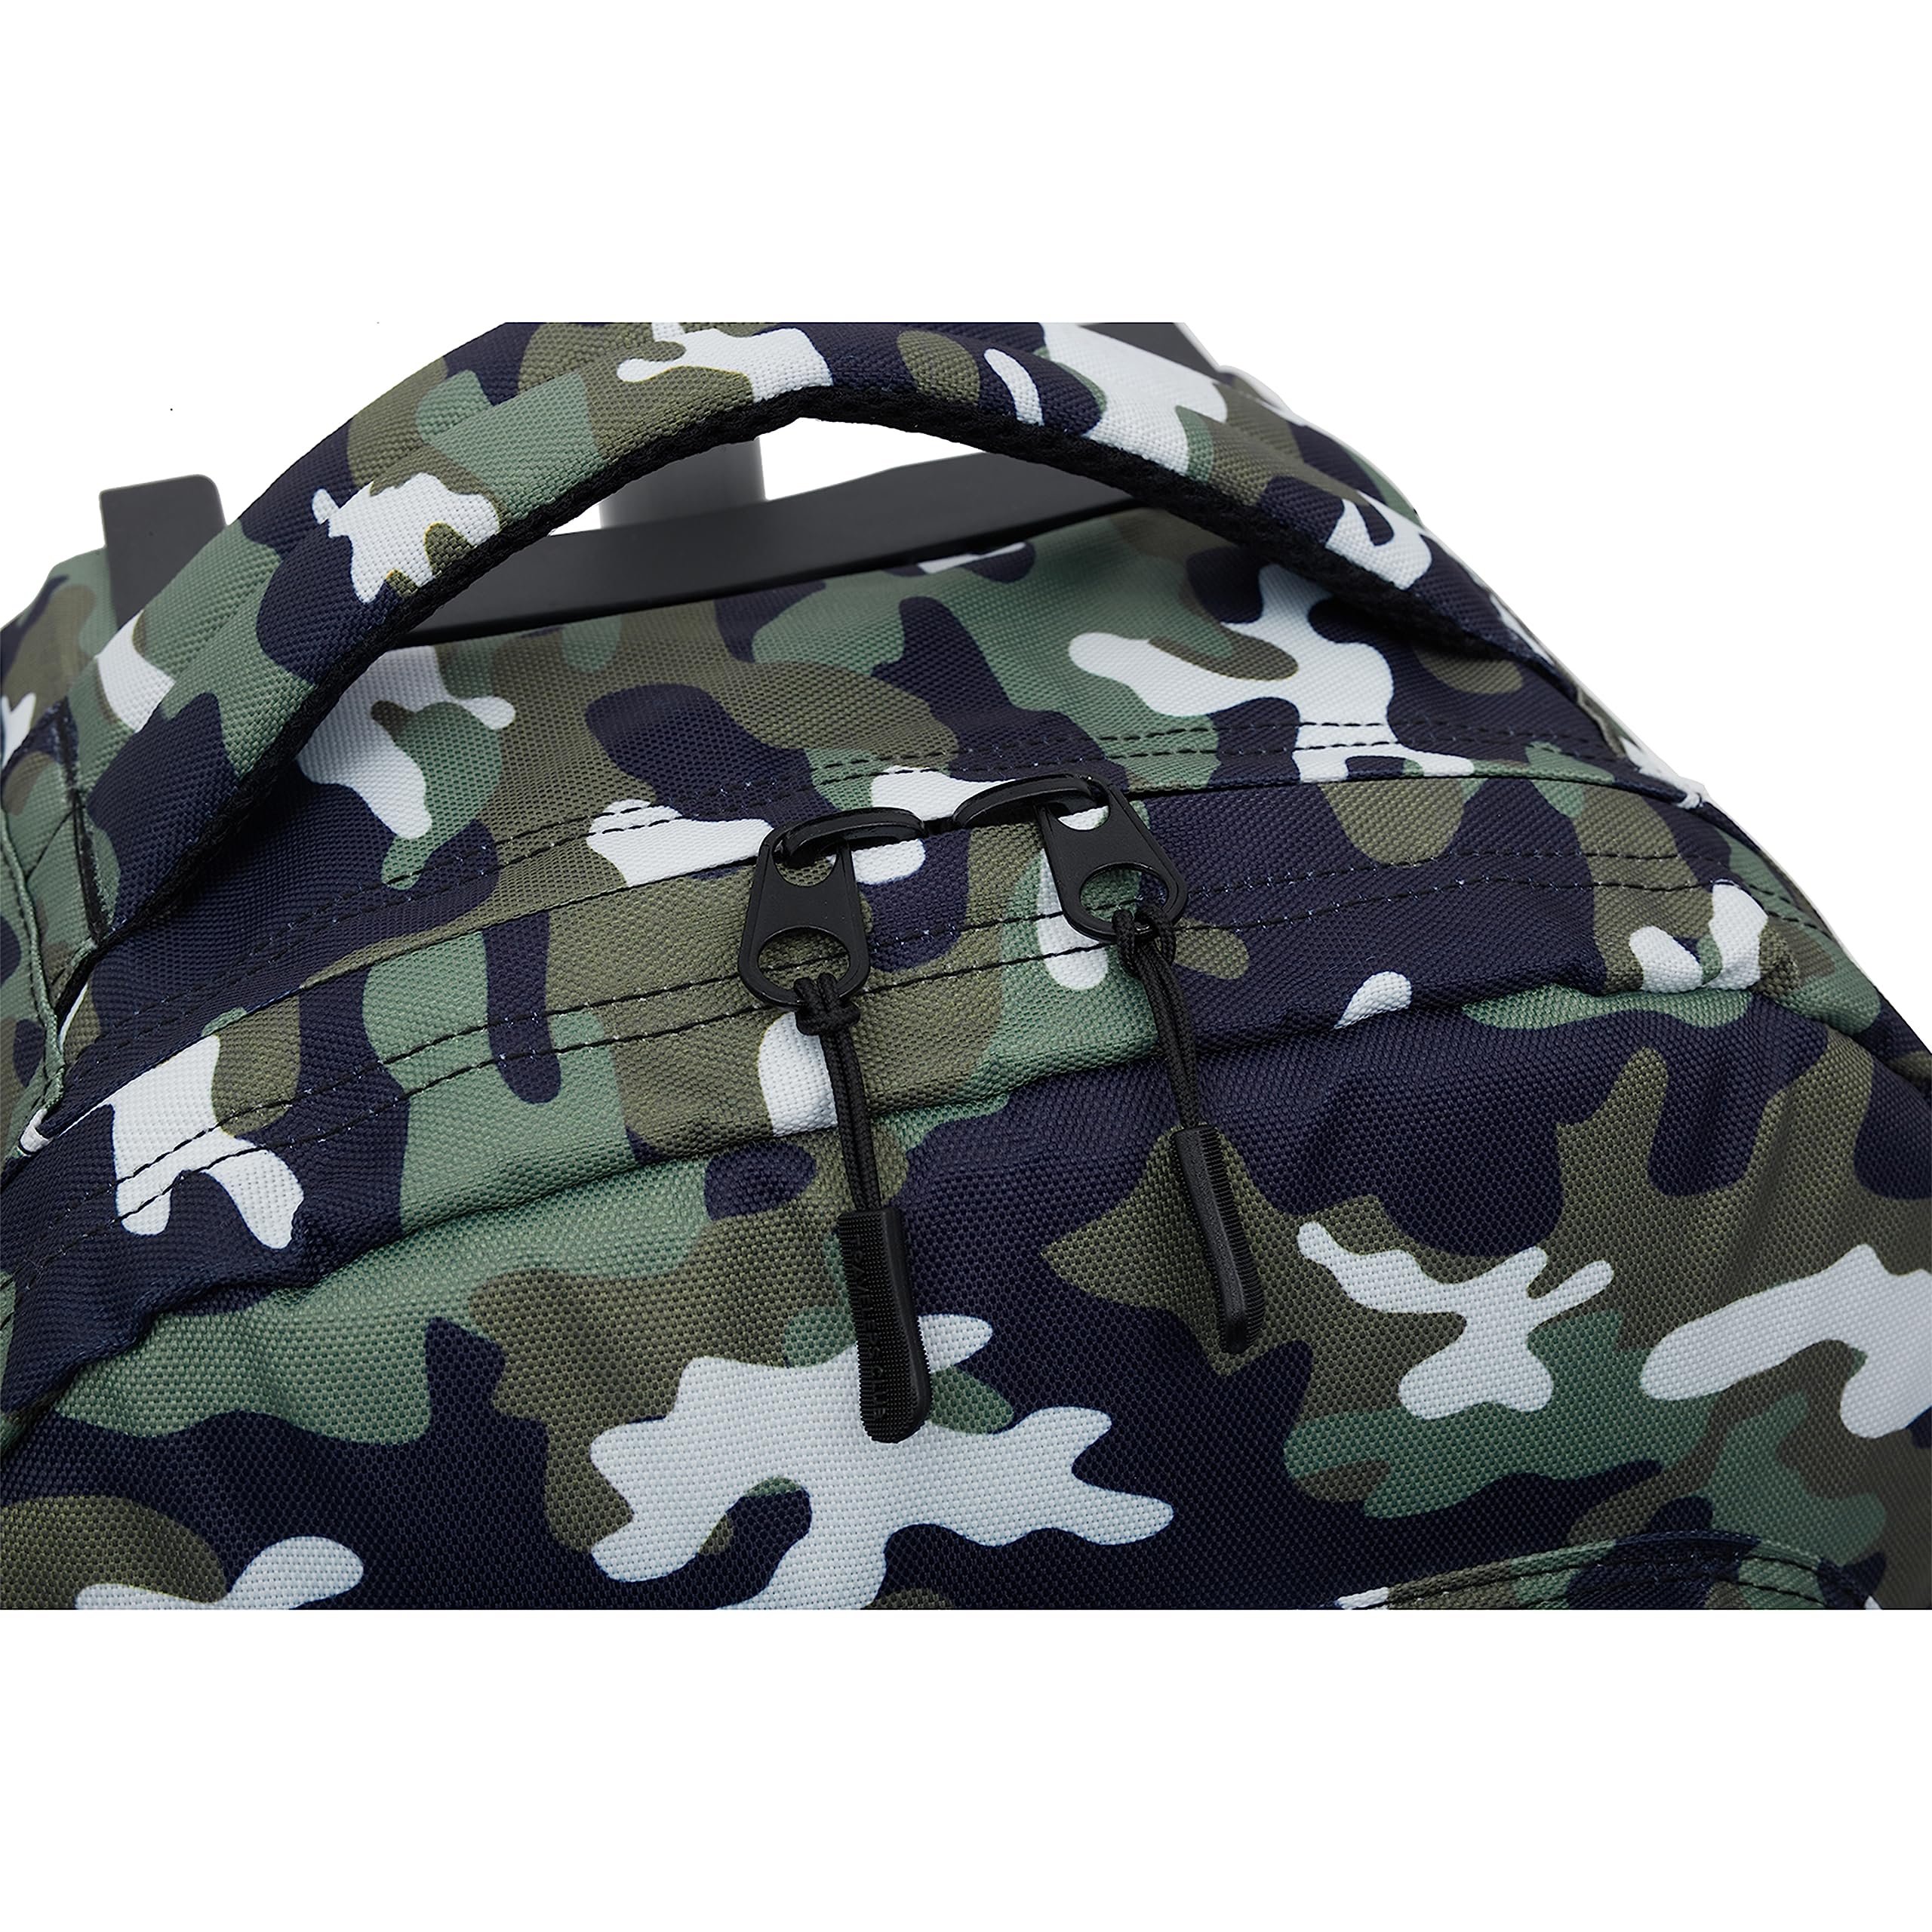 Travelers Club Rolling Backpack with Shoulder Straps, Camo, 18-Inch